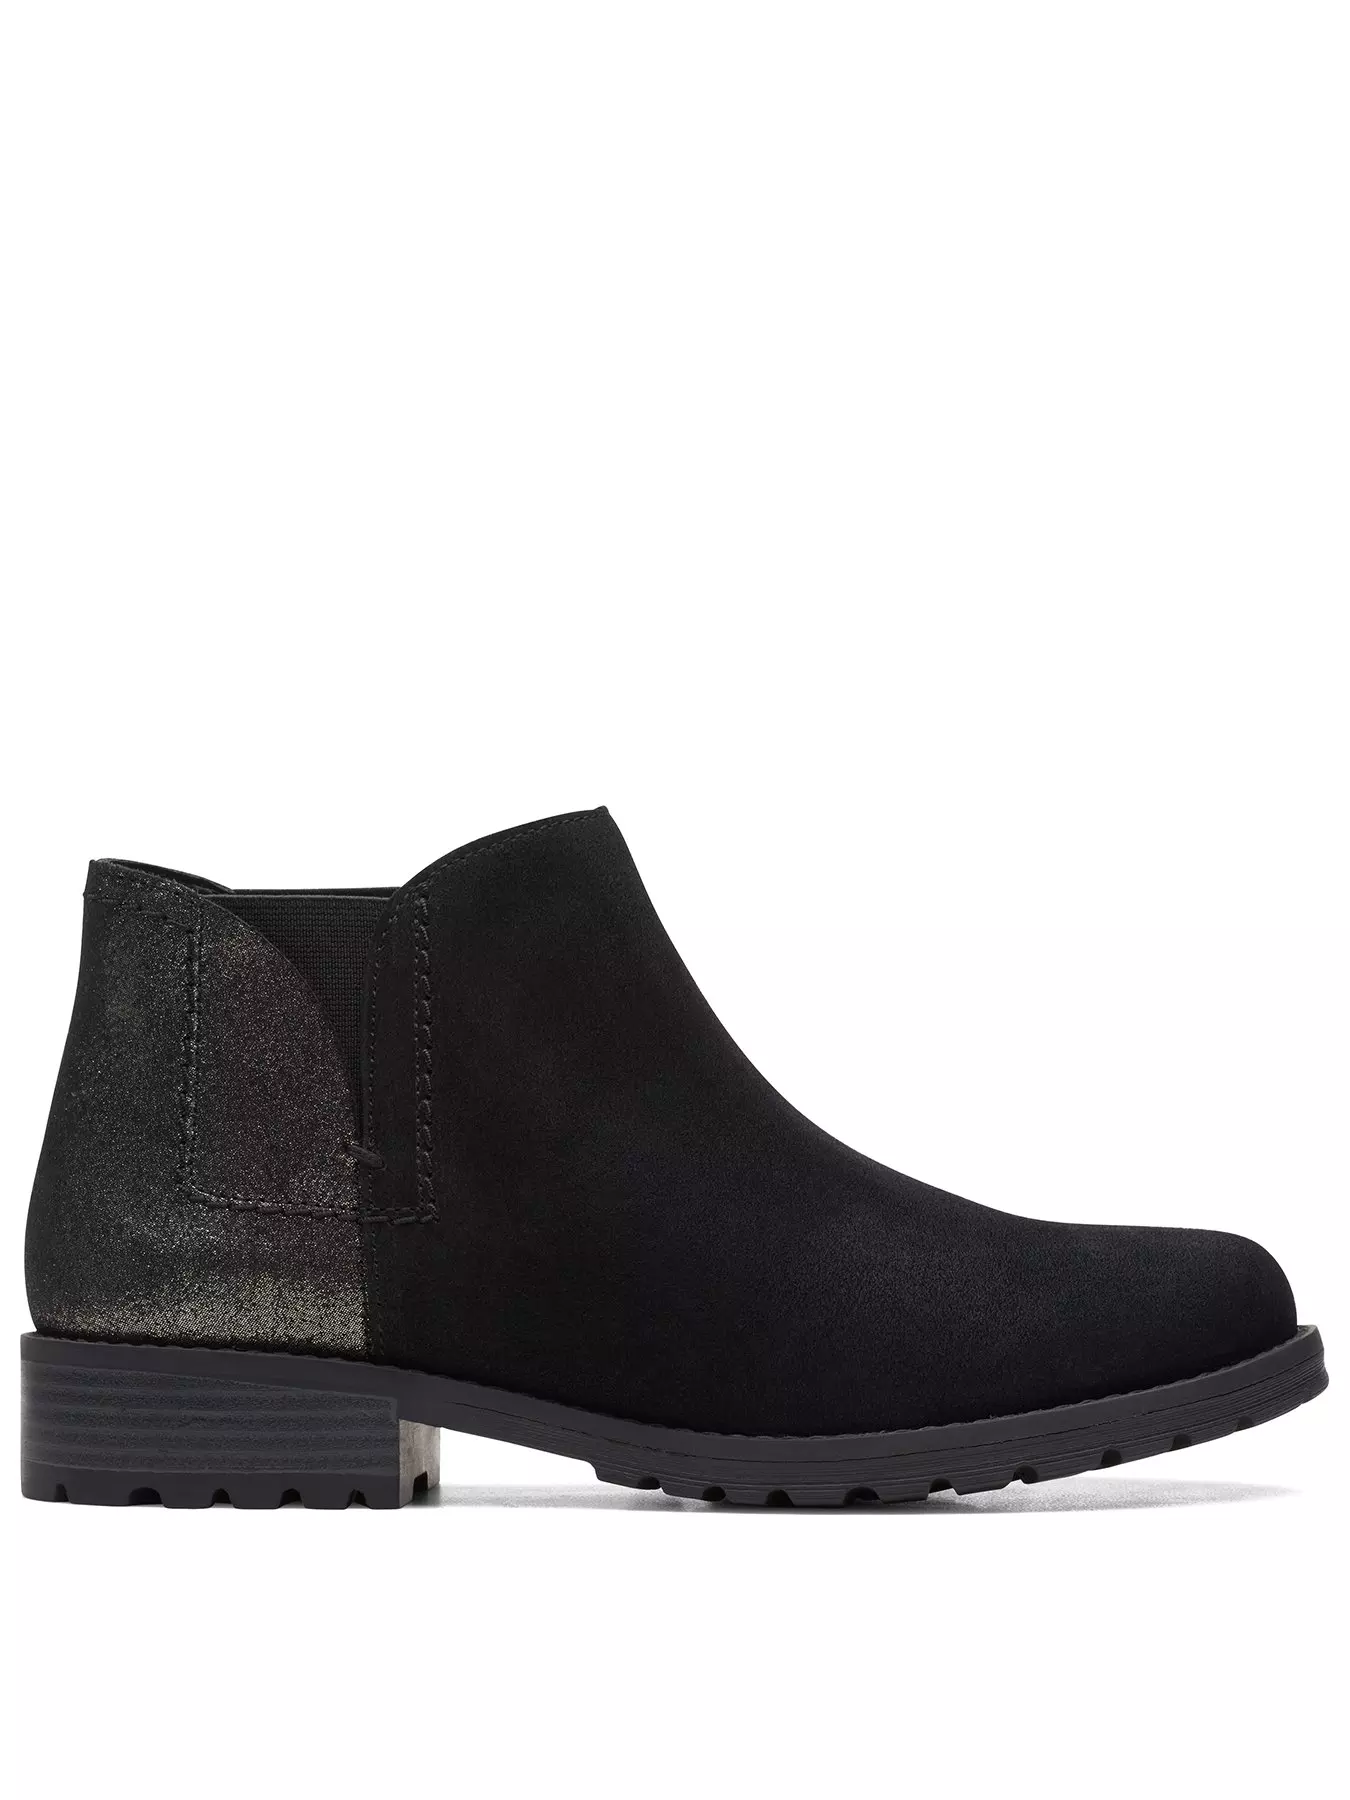 Clarks Shoes | Sale | Very Online